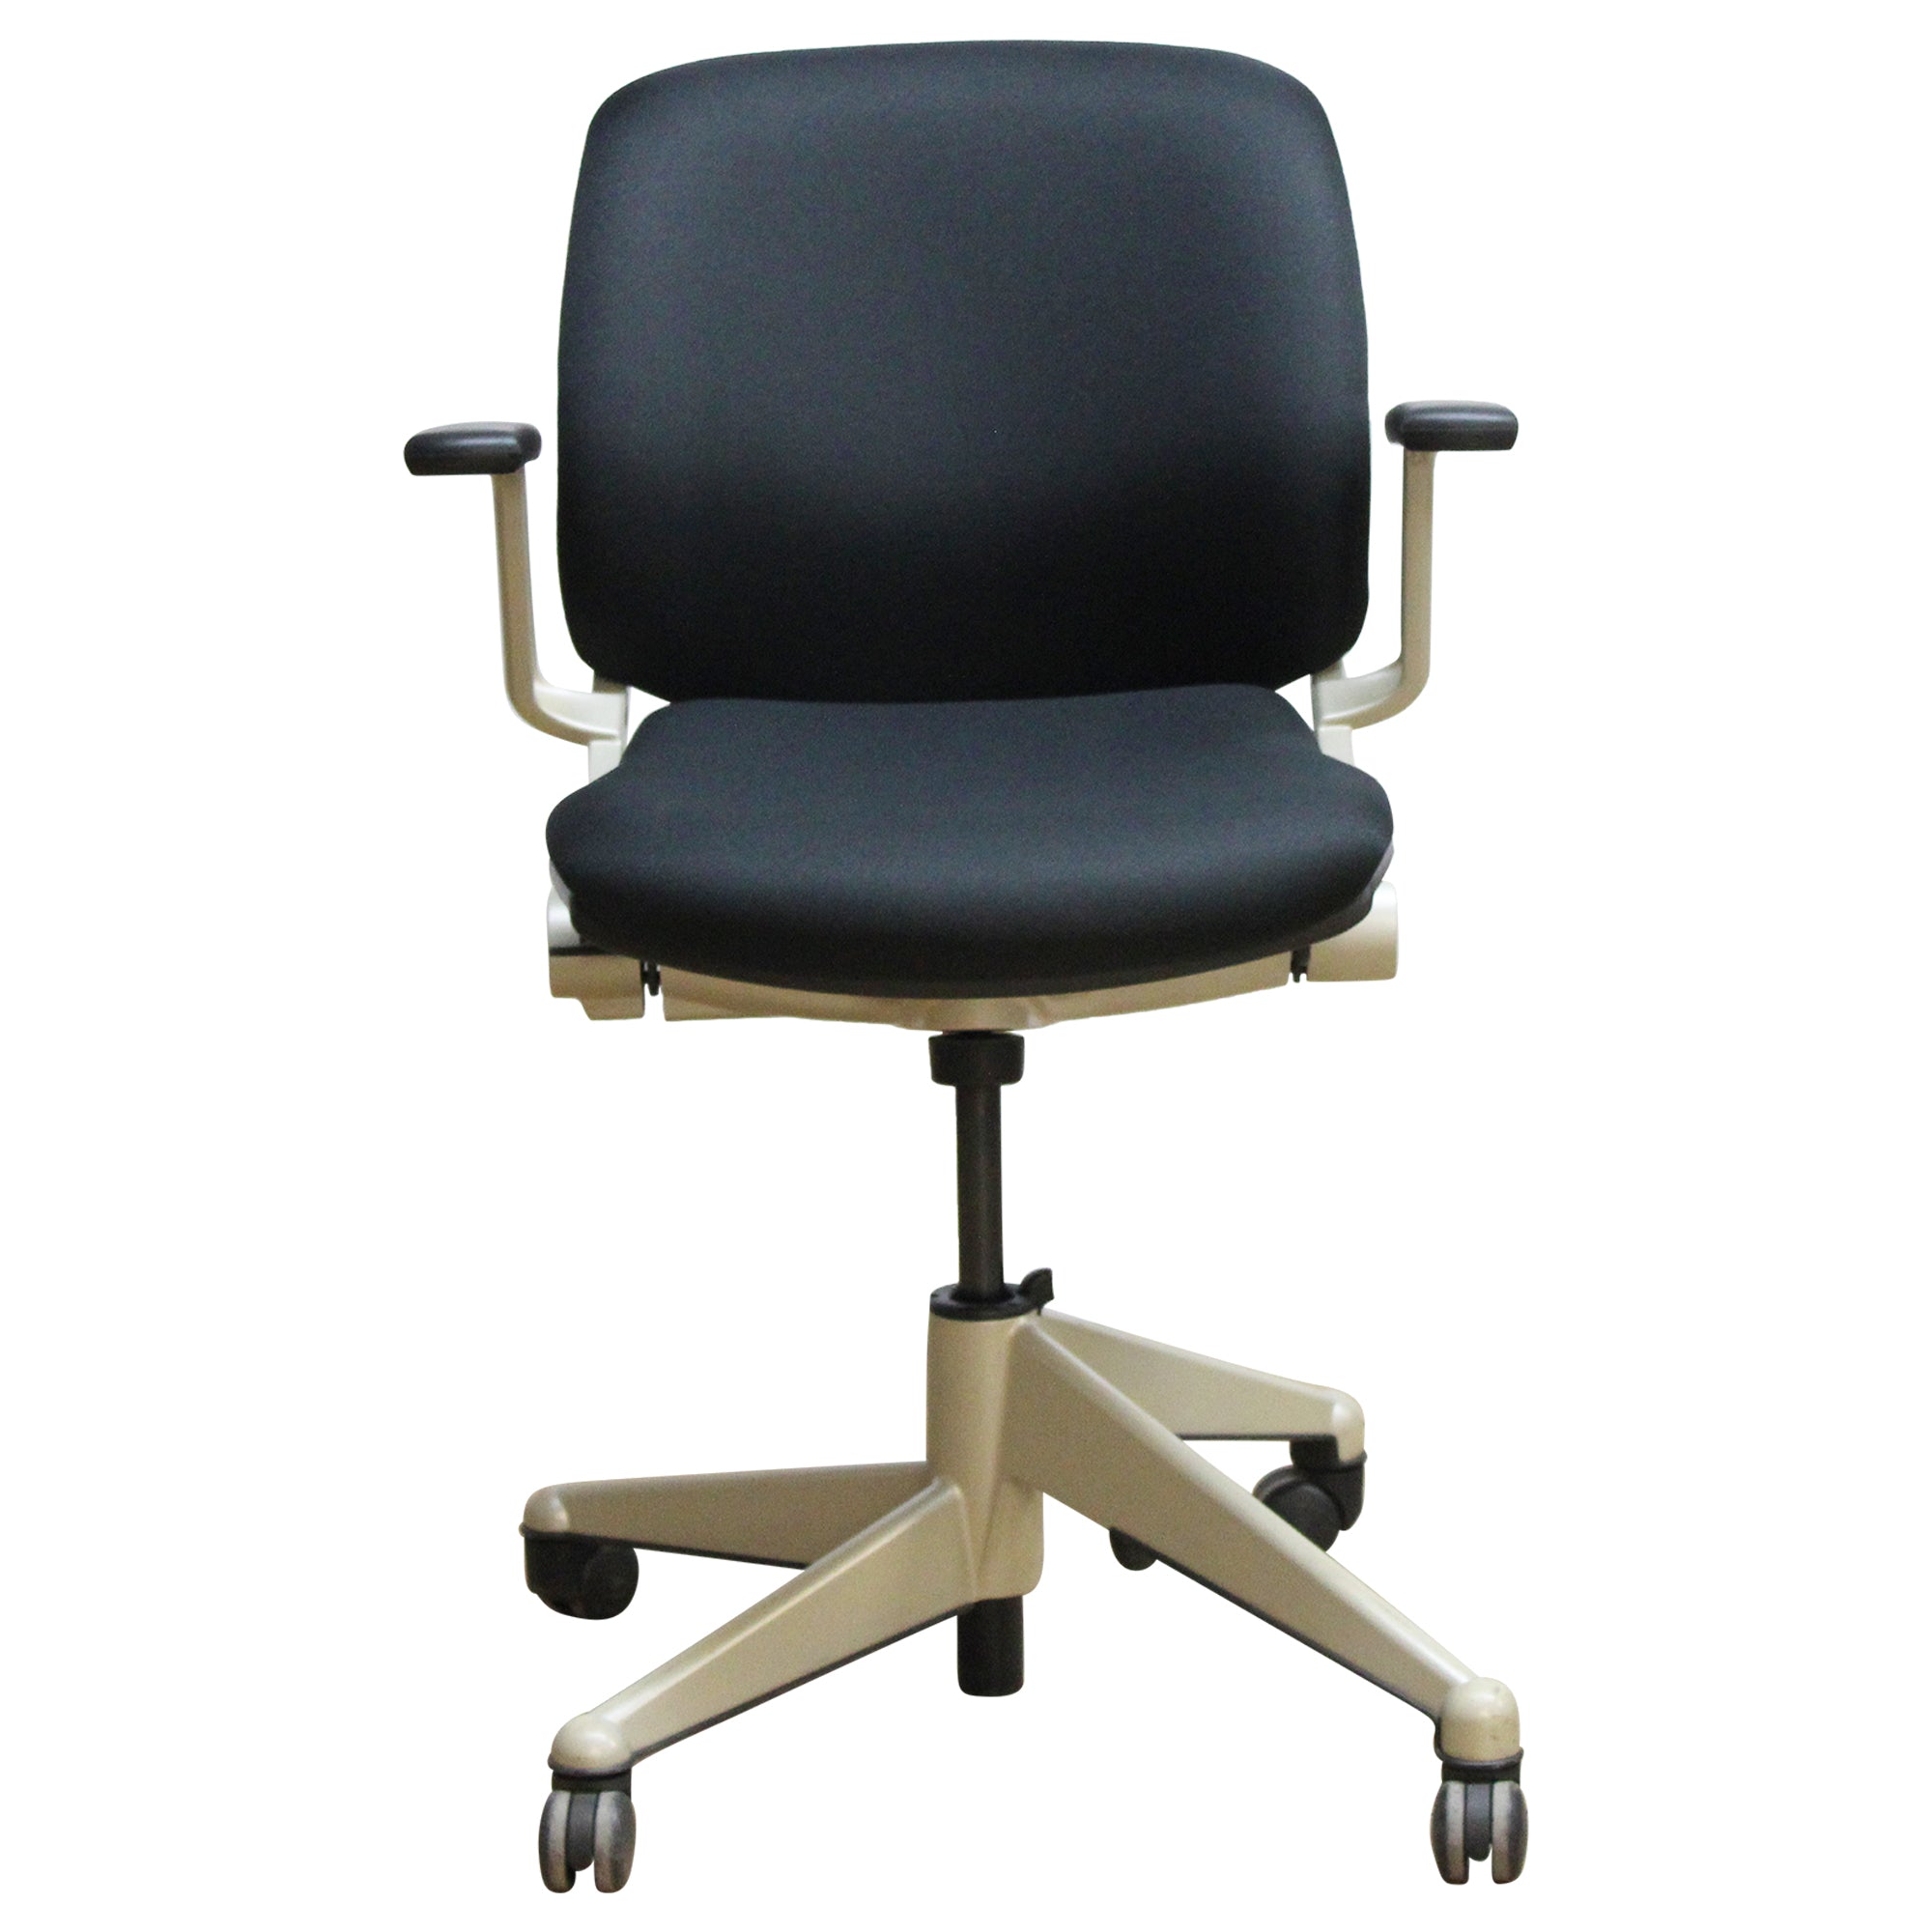 Steelcase Vecta Kart, Gold Base - Preowned